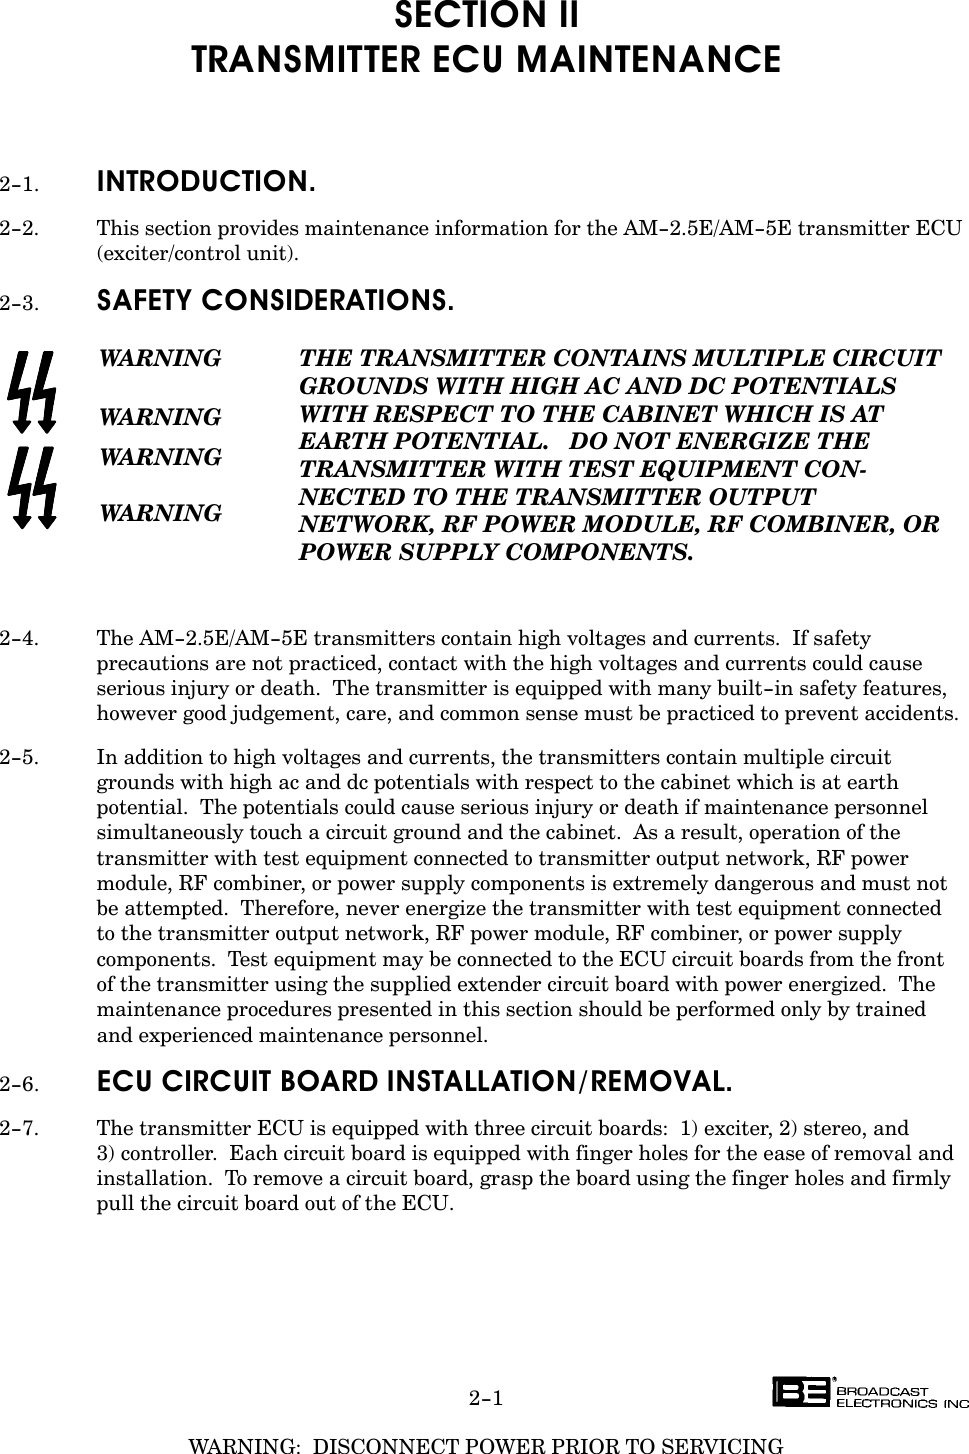 WARNING:  DISCONNECT POWER PRIOR TO SERVICING2-1SECTION IITRANSMITTER ECU MAINTENANCE2-1. INTRODUCTION.2-2. This section provides maintenance information for the AM-2.5E/AM-5E transmitter ECU(exciter/control unit).2-3. SAFETY CONSIDERATIONS.WARNINGWARNINGWARNINGWARNINGTHE TRANSMITTER CONTAINS MULTIPLE CIRCUITGROUNDS WITH HIGH AC AND DC POTENTIALSWITH RESPECT TO THE CABINET WHICH IS AT EARTH POTENTIAL.   DO NOT ENERGIZE THETRANSMITTER WITH TEST EQUIPMENT CONĆNECTED TO THE TRANSMITTER OUTPUT NETWORK, RF POWER MODULE, RF COMBINER, ORPOWER SUPPLY COMPONENTS.2-4. The AM-2.5E/AM-5E transmitters contain high voltages and currents.  If safetyprecautions are not practiced, contact with the high voltages and currents could causeserious injury or death.  The transmitter is equipped with many built-in safety features,however good judgement, care, and common sense must be practiced to prevent accidents.2-5. In addition to high voltages and currents, the transmitters contain multiple circuitgrounds with high ac and dc potentials with respect to the cabinet which is at earthpotential.  The potentials could cause serious injury or death if maintenance personnelsimultaneously touch a circuit ground and the cabinet.  As a result, operation of thetransmitter with test equipment connected to transmitter output network, RF powermodule, RF combiner, or power supply components is extremely dangerous and must notbe attempted.  Therefore, never energize the transmitter with test equipment connected to the transmitter output network, RF power module, RF combiner, or power supplycomponents.  Test equipment may be connected to the ECU circuit boards from the front of the transmitter using the supplied extender circuit board with power energized.  Themaintenance procedures presented in this section should be performed only by trained and experienced maintenance personnel.2-6. ECU CIRCUIT BOARD INSTALLATION/REMOVAL.2-7. The transmitter ECU is equipped with three circuit boards:  1) exciter, 2) stereo, and 3) controller.  Each circuit board is equipped with finger holes for the ease of removal andinstallation.  To remove a circuit board, grasp the board using the finger holes and firmlypull the circuit board out of the ECU.